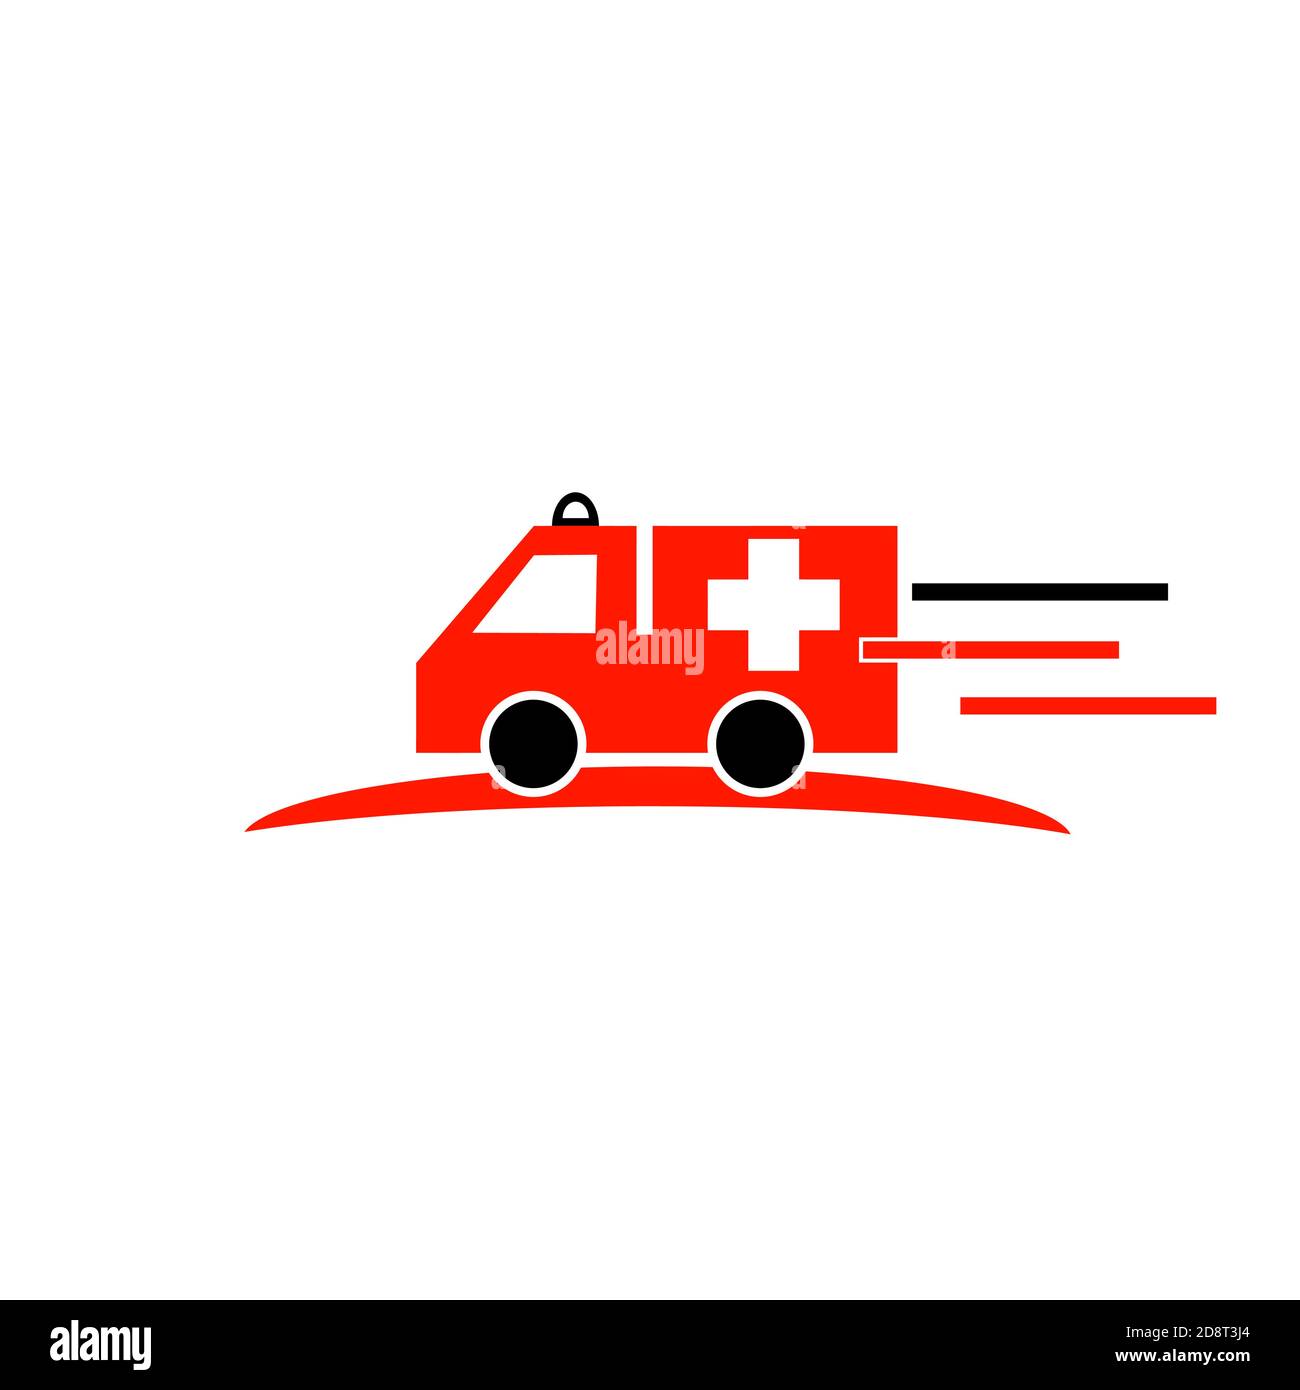 Ambulance hospital logo icon health care and medical sign. Stock Vector